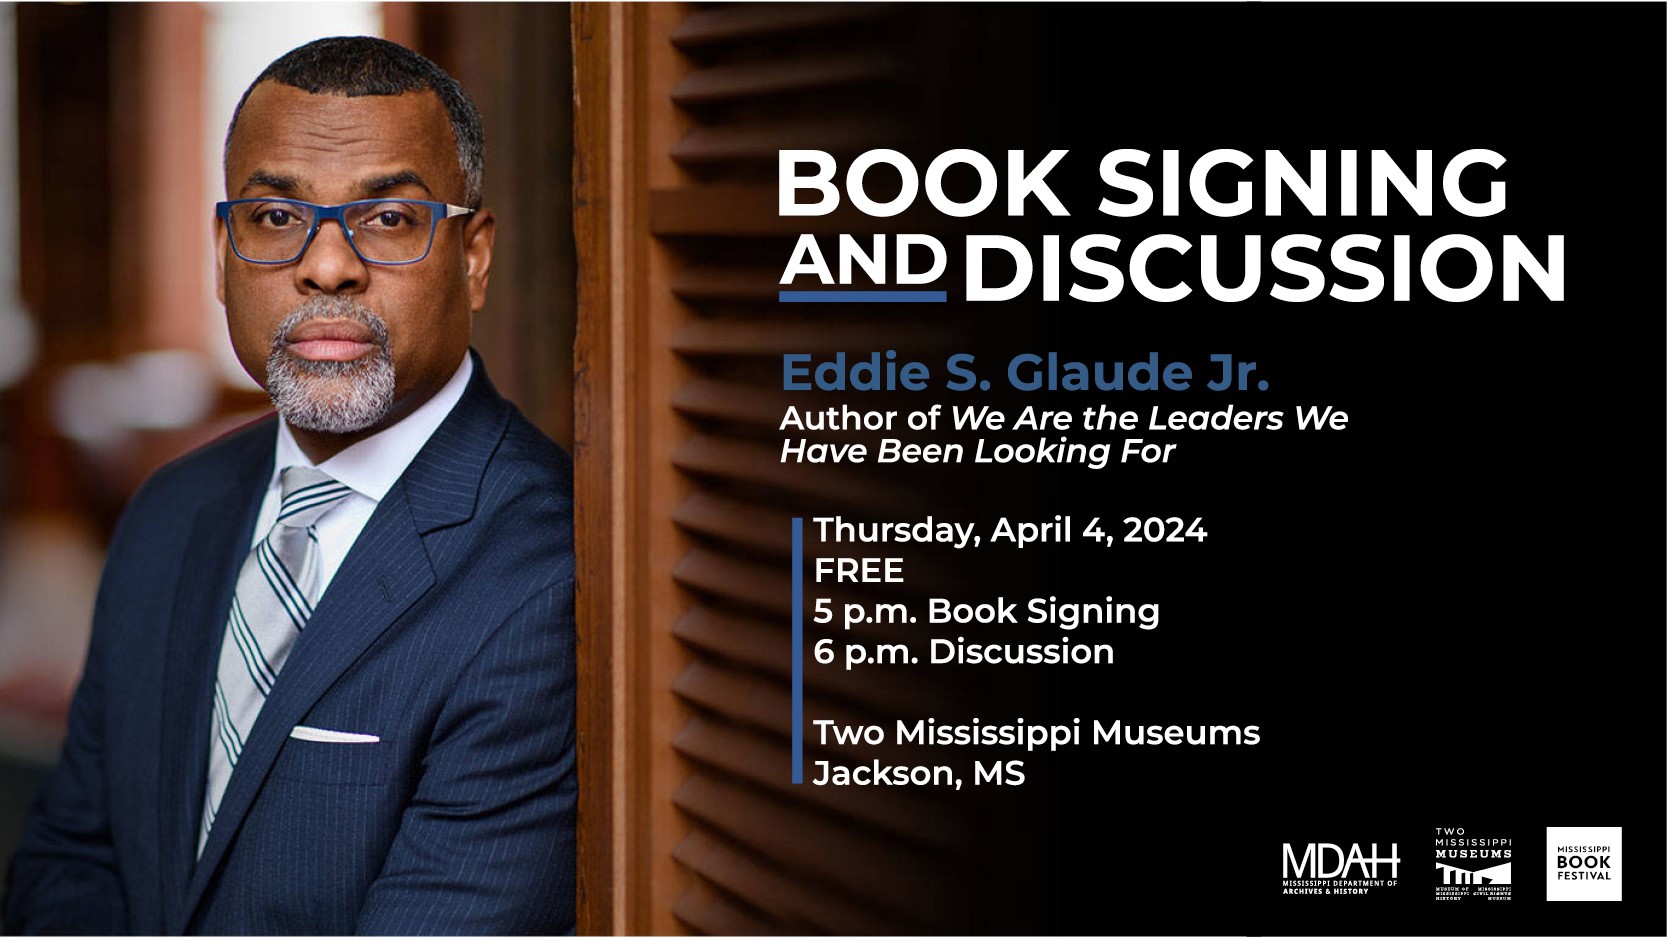 Eddie S. Glaude Jr. Book Signing and Discussion